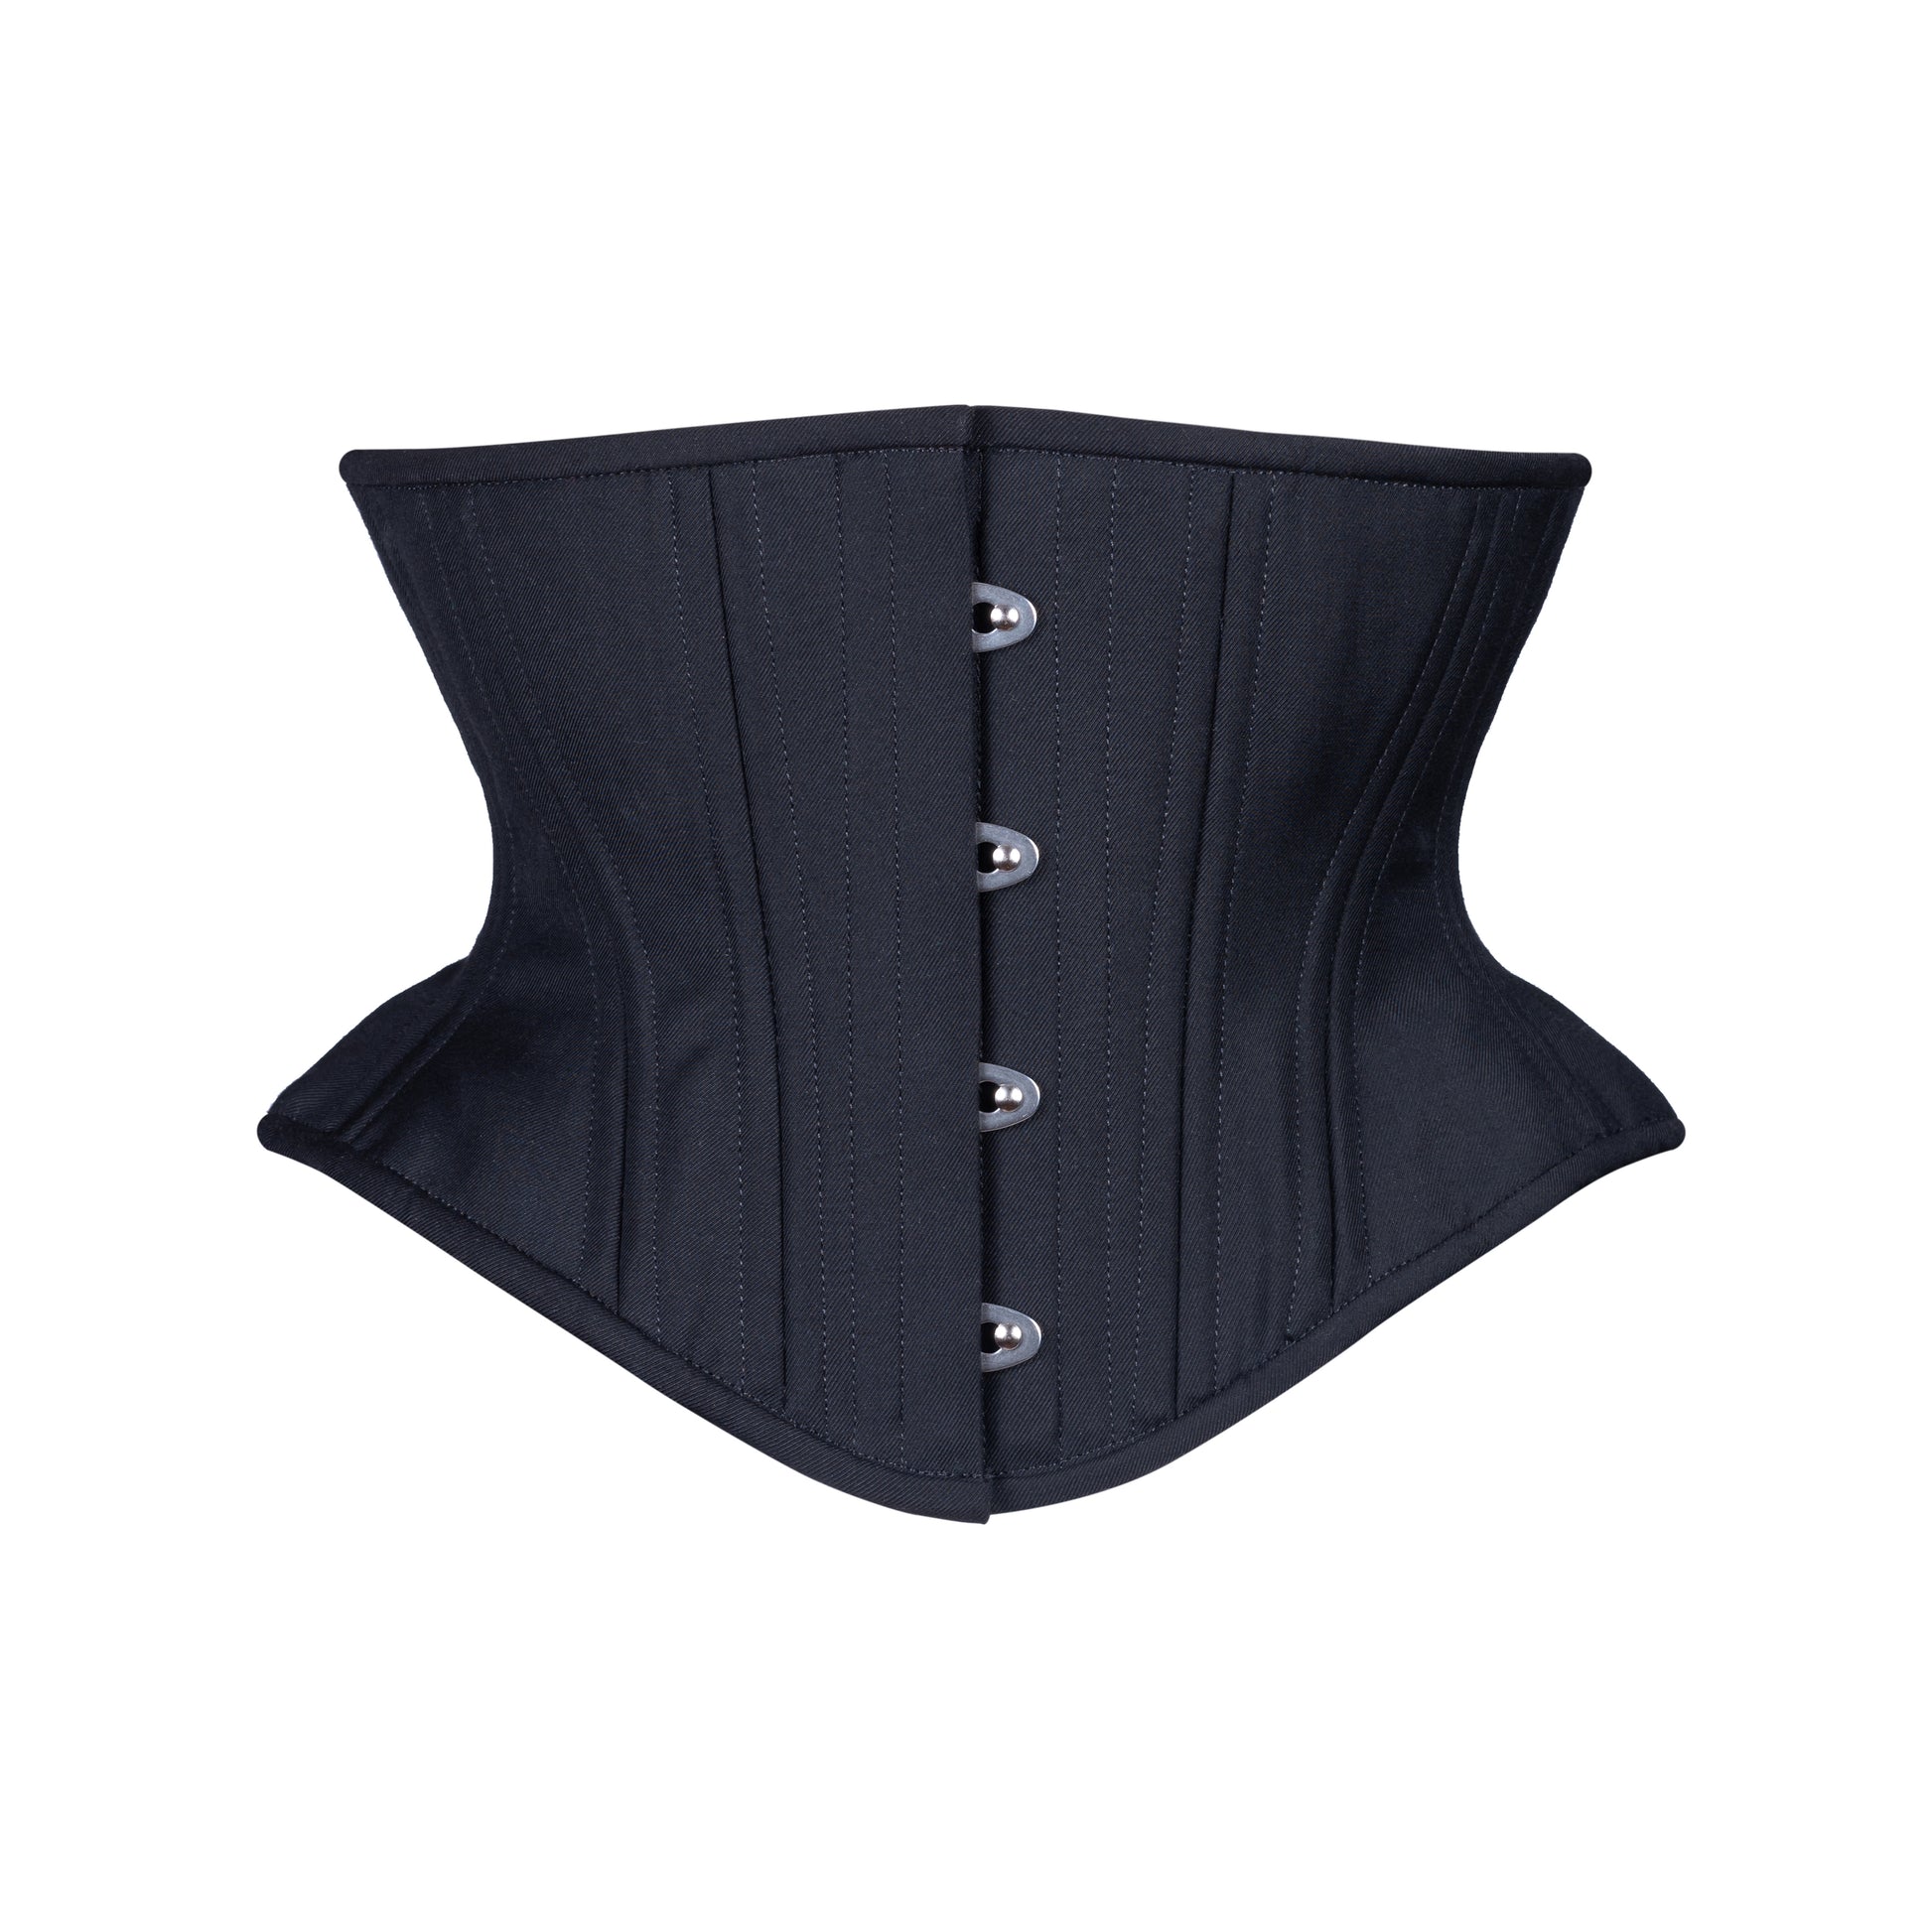 Black Cashmere Corset, Hourglass Silhouette, Short – Timeless Trends